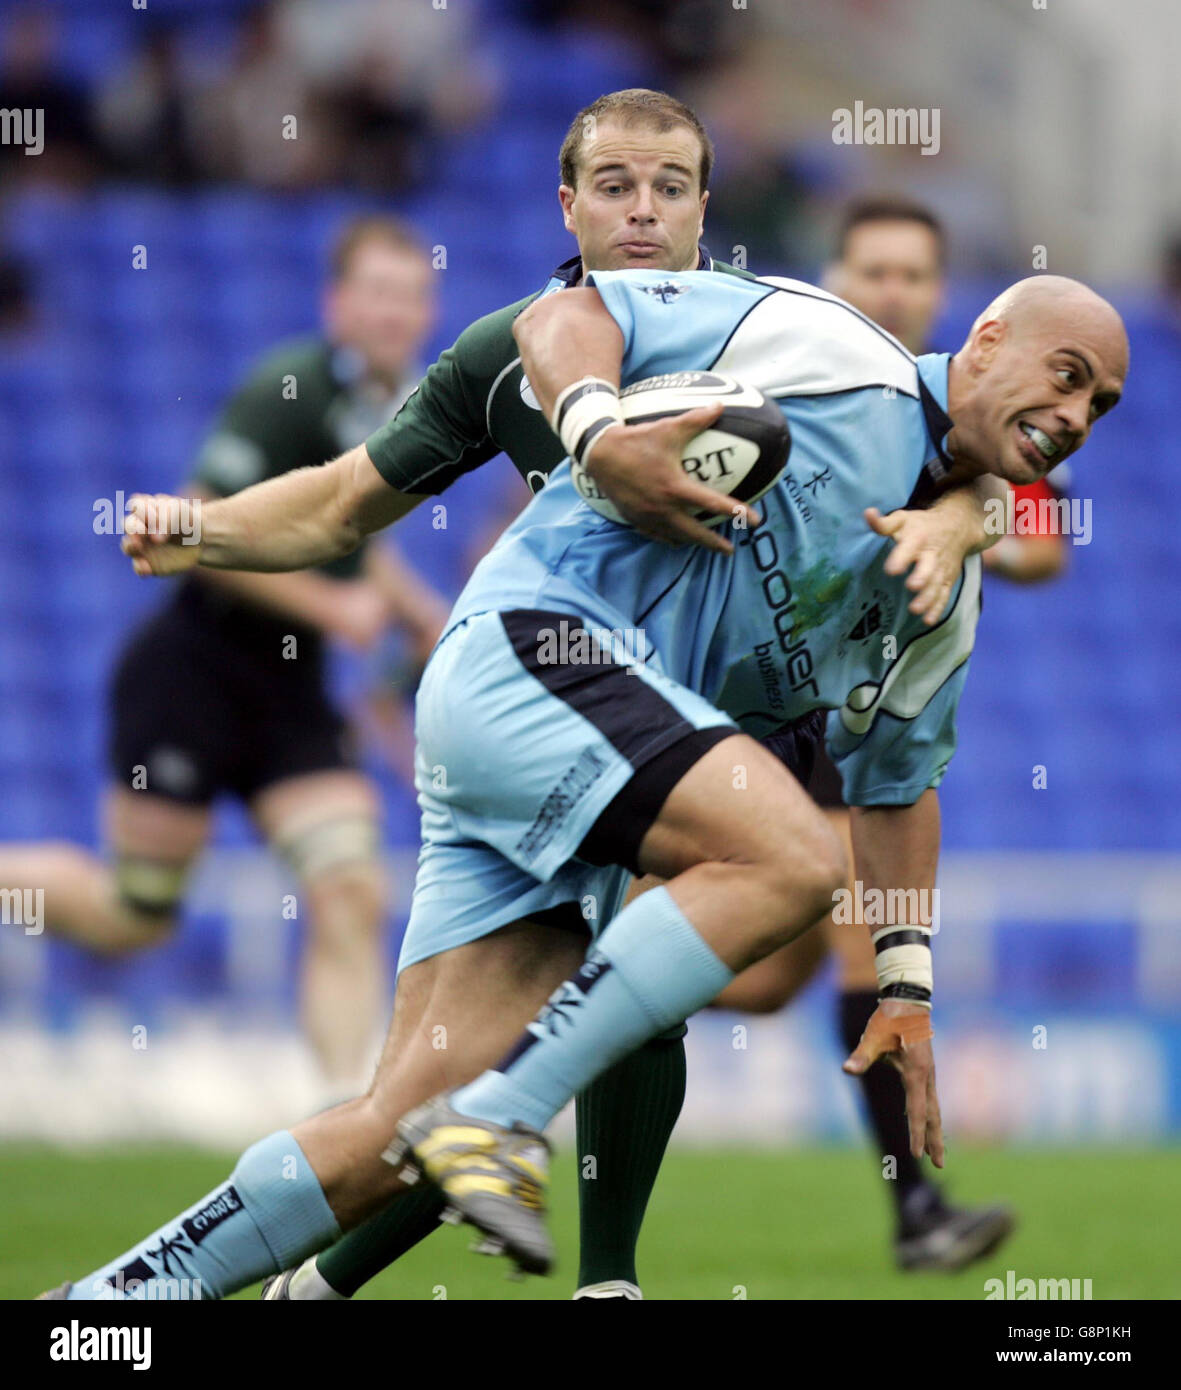 Worcester's Dale Rasmussen is tackled by London Irish's Rodd Penney during the Guinness Premiership match at the Madejski Stadium, Reading, Sunday September 11, 2005. PRESS ASSOCIATION Photo. Photo credit should read: David Davies/PA. Stock Photo